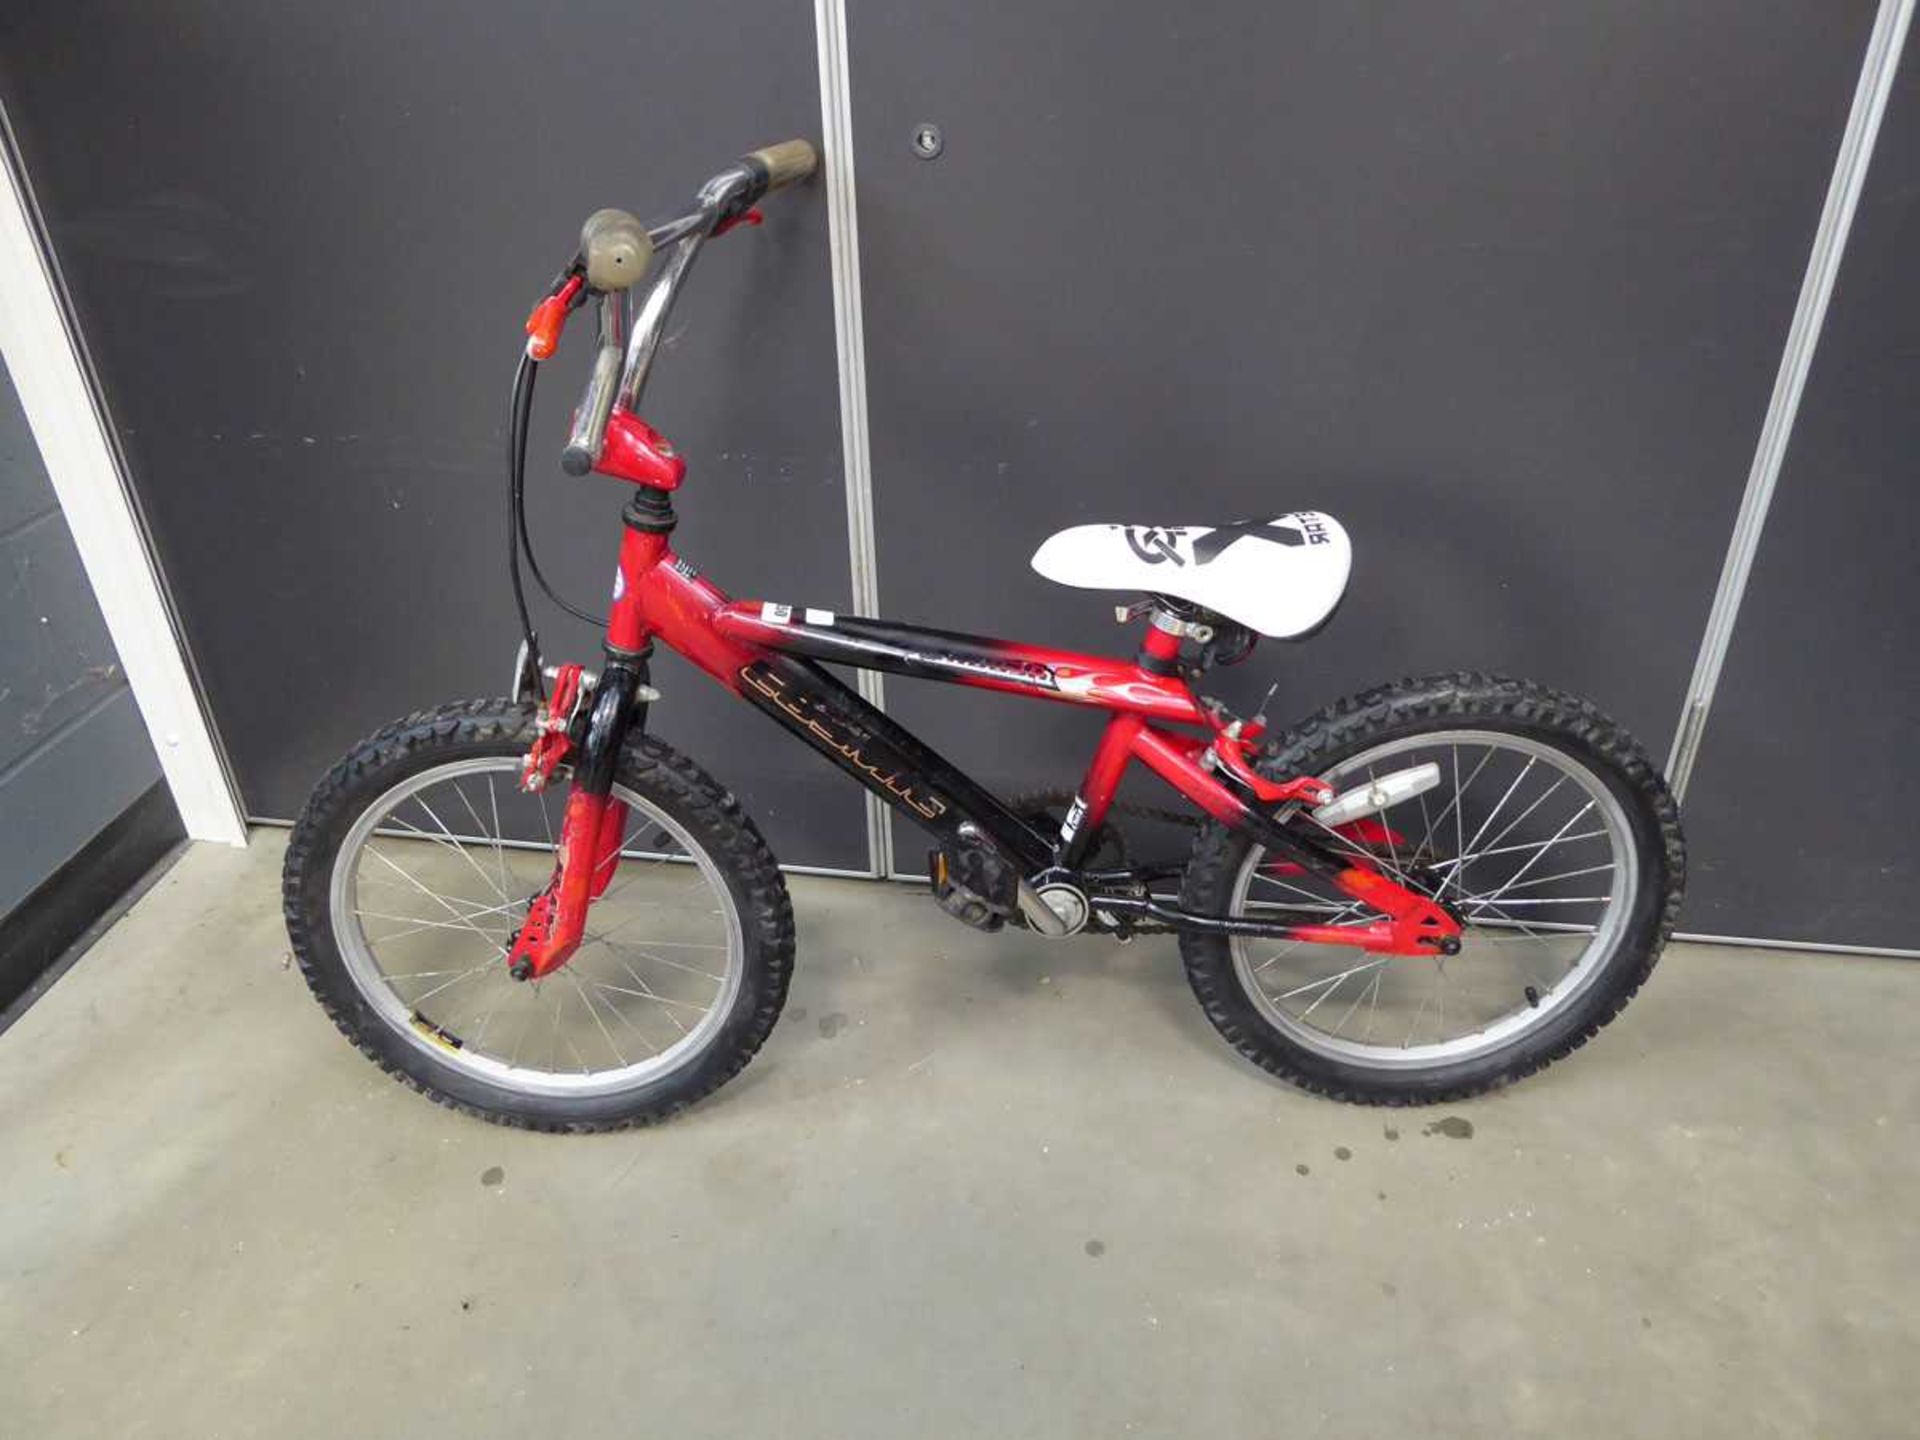 Child's BMX bike in red and black